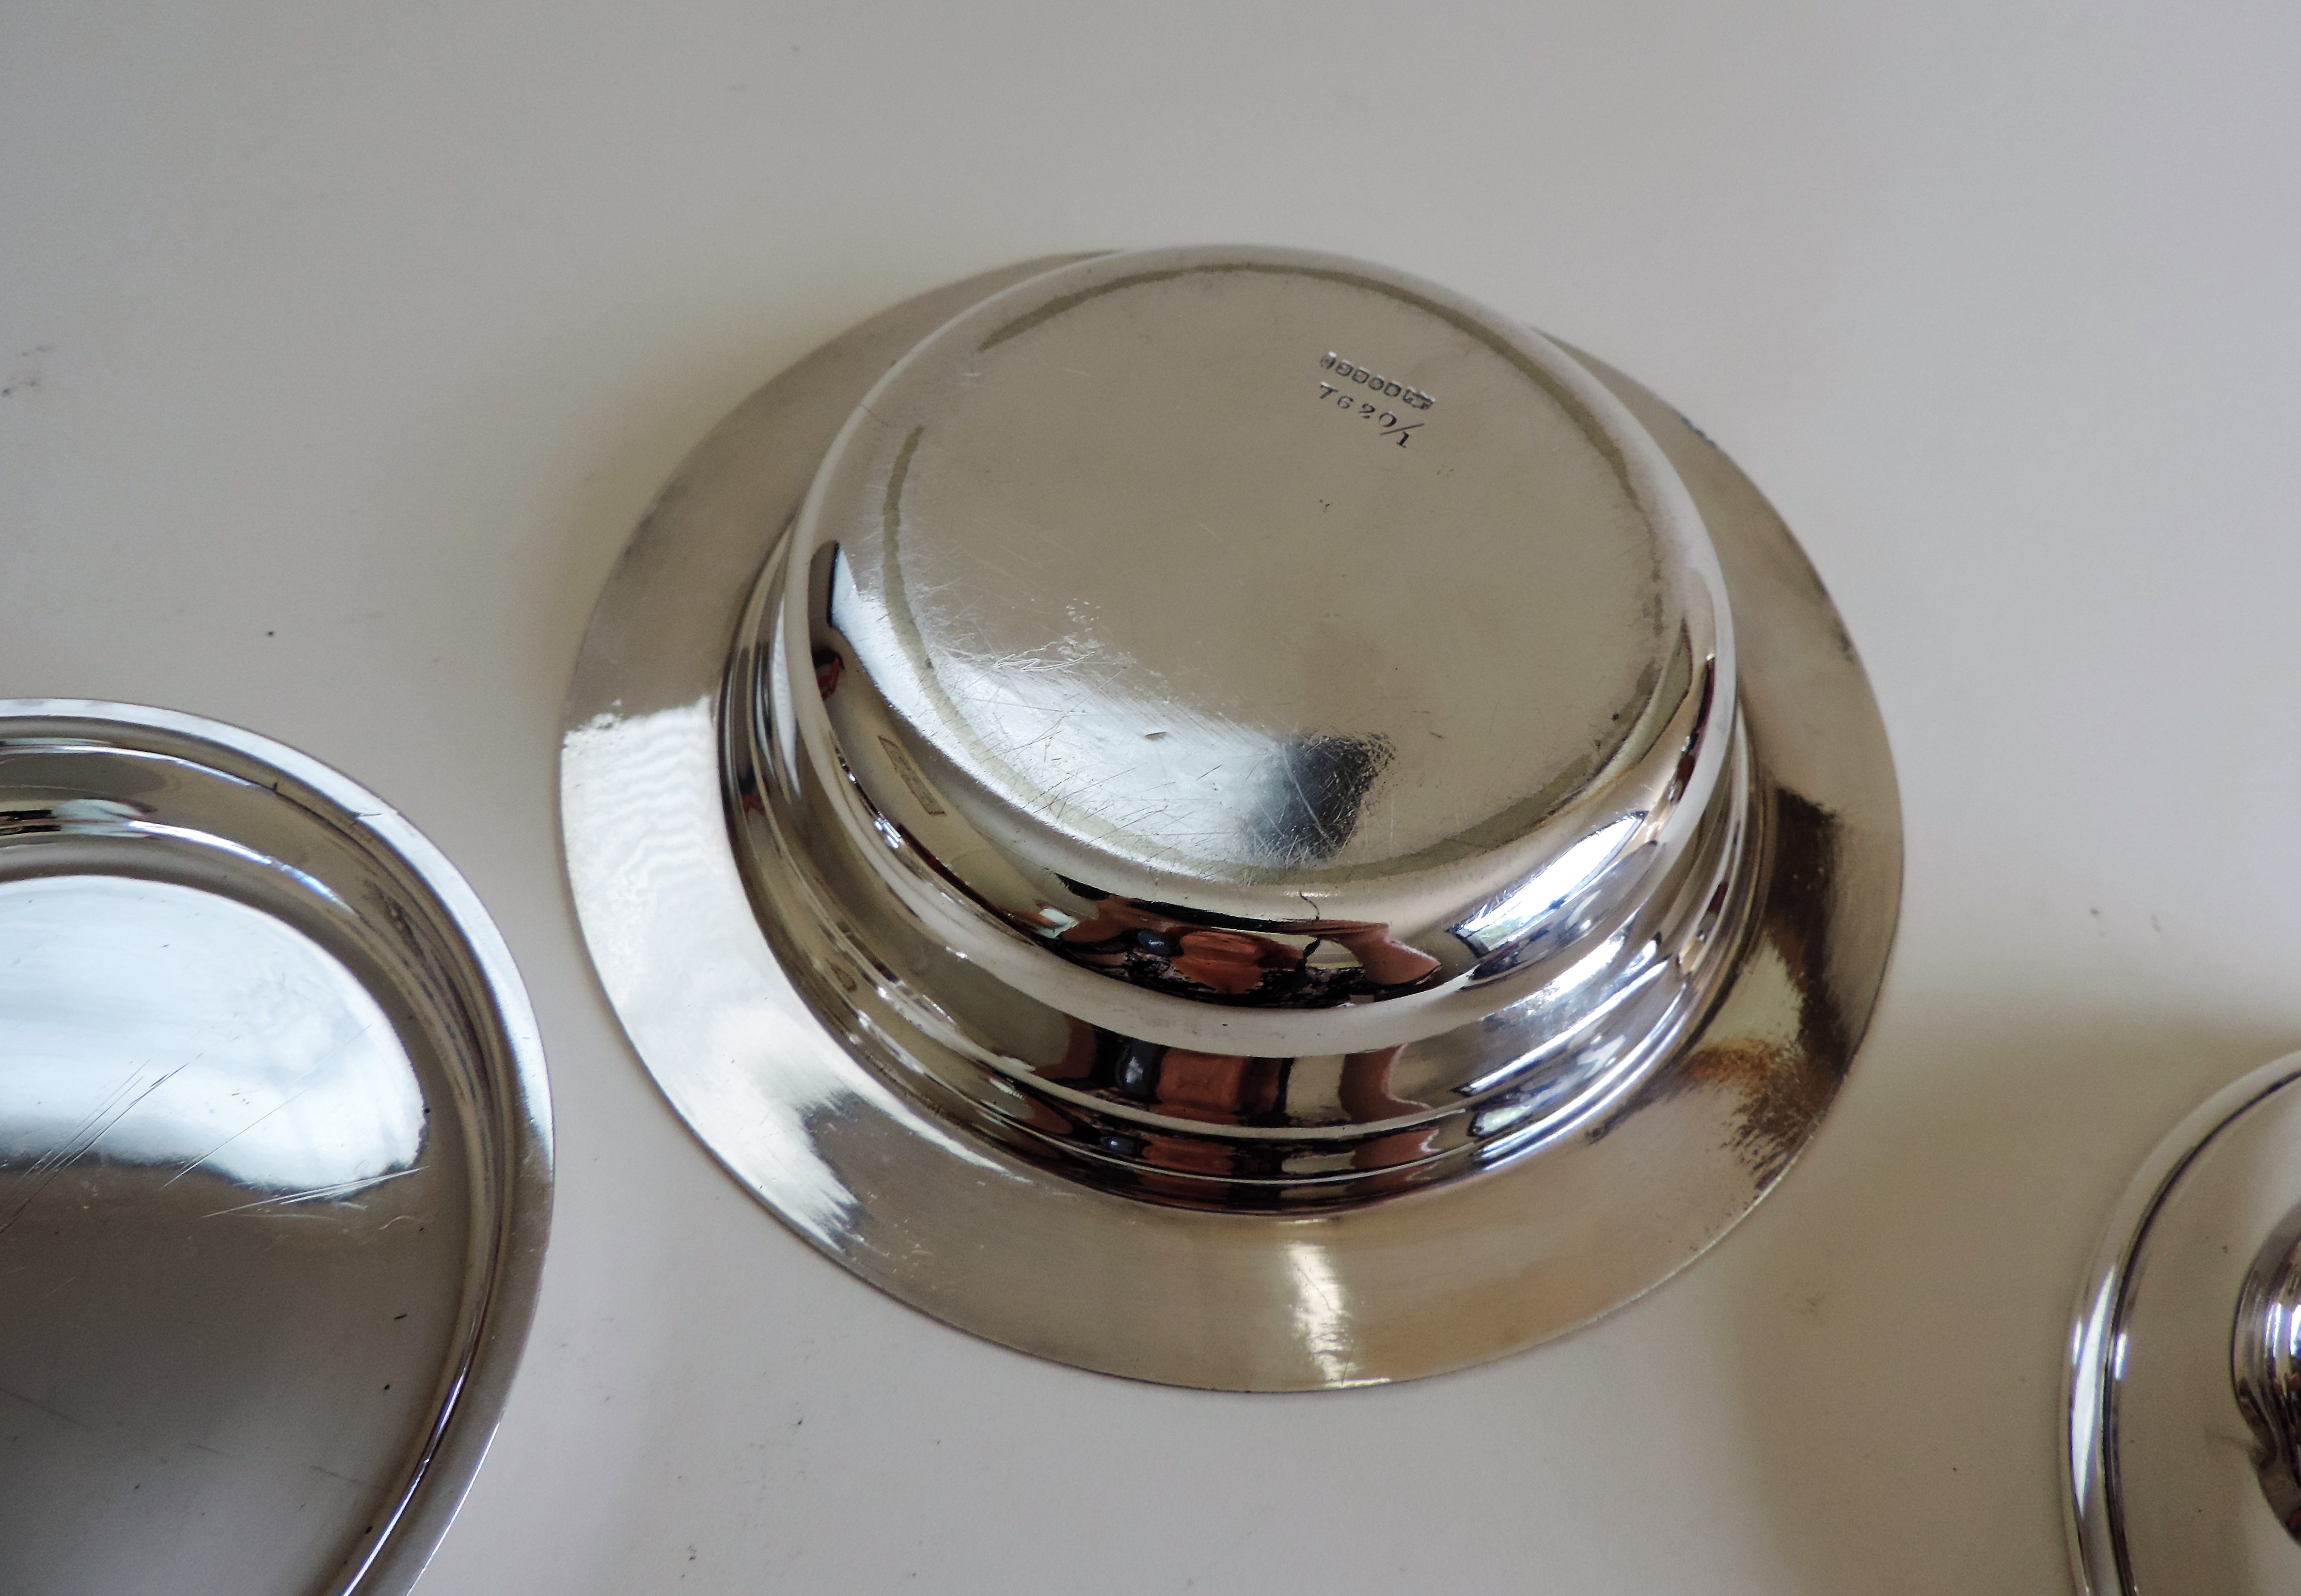 Antique Art Deco Silver Plated Muffin Dish/Warmer - Image 3 of 6